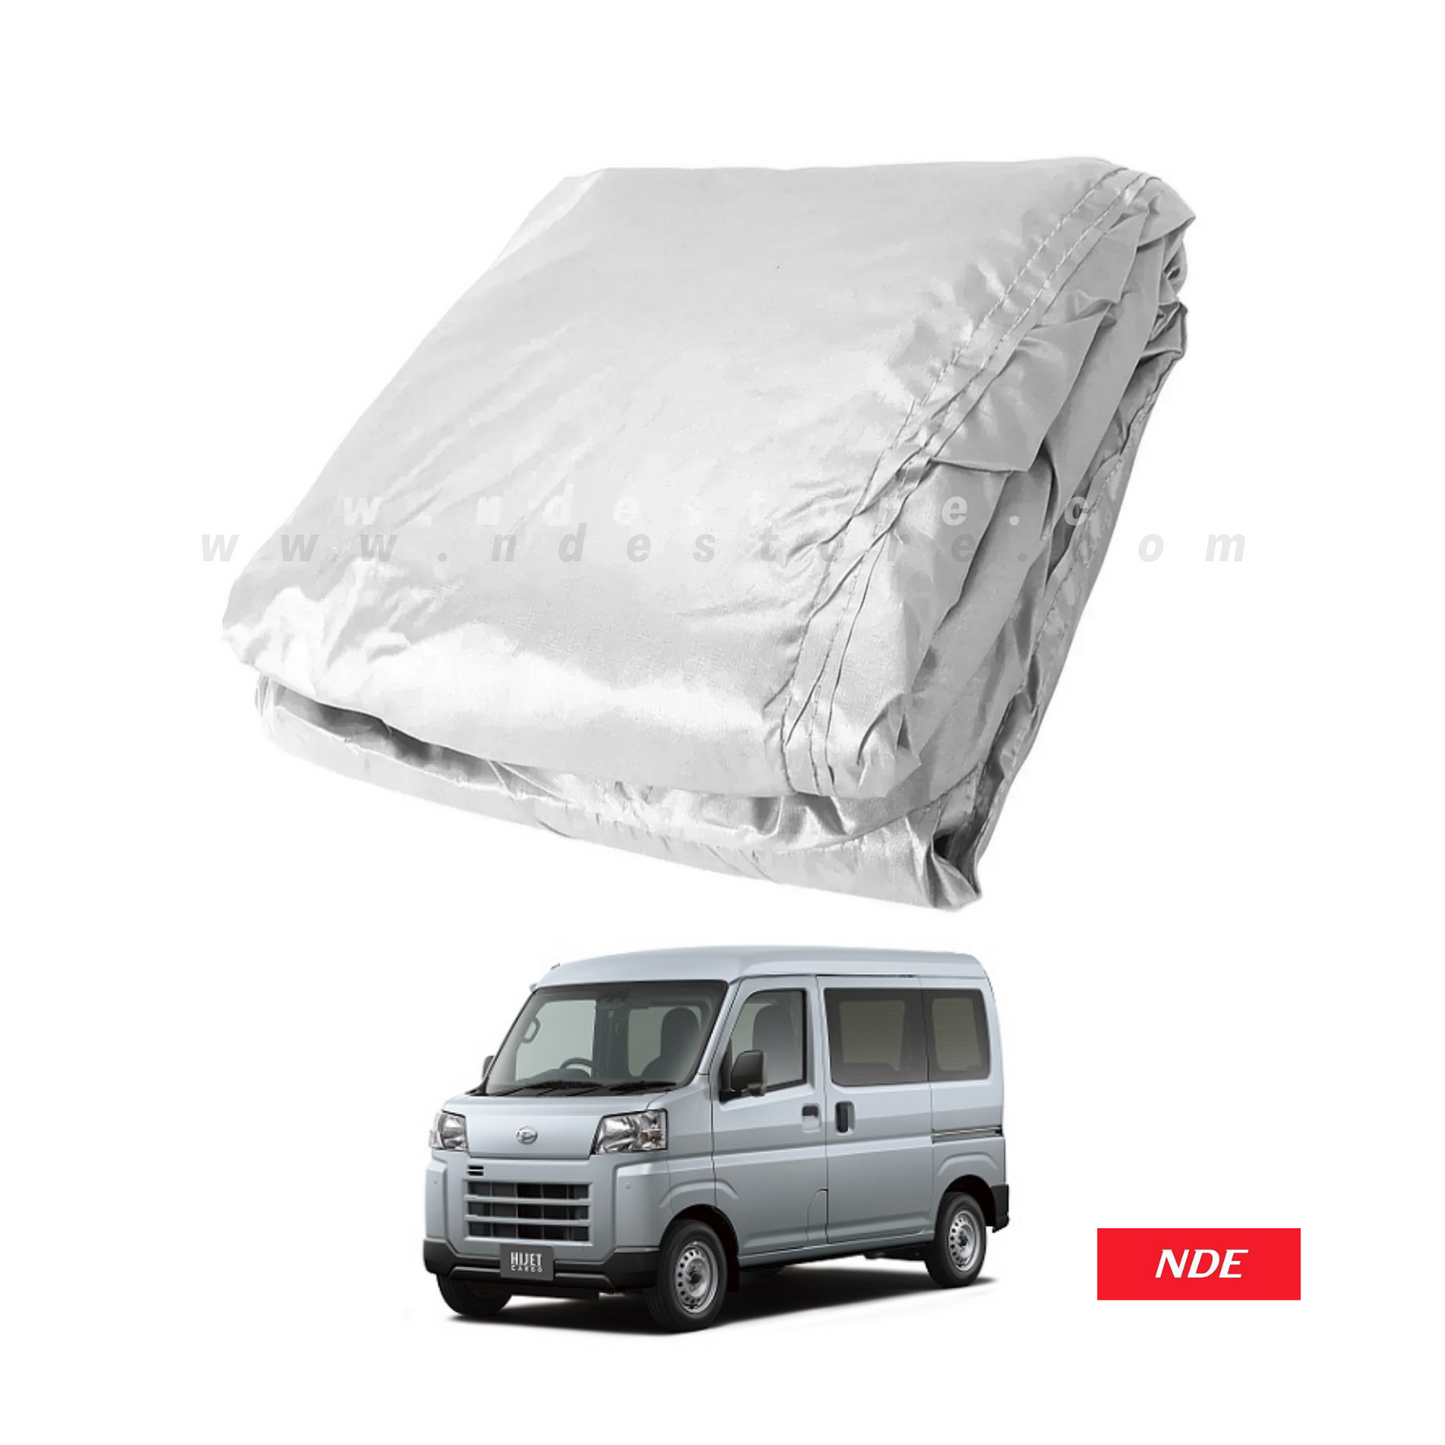 TOP COVER IMPORTED MATERIAL FOR DAIHATSU HIJET